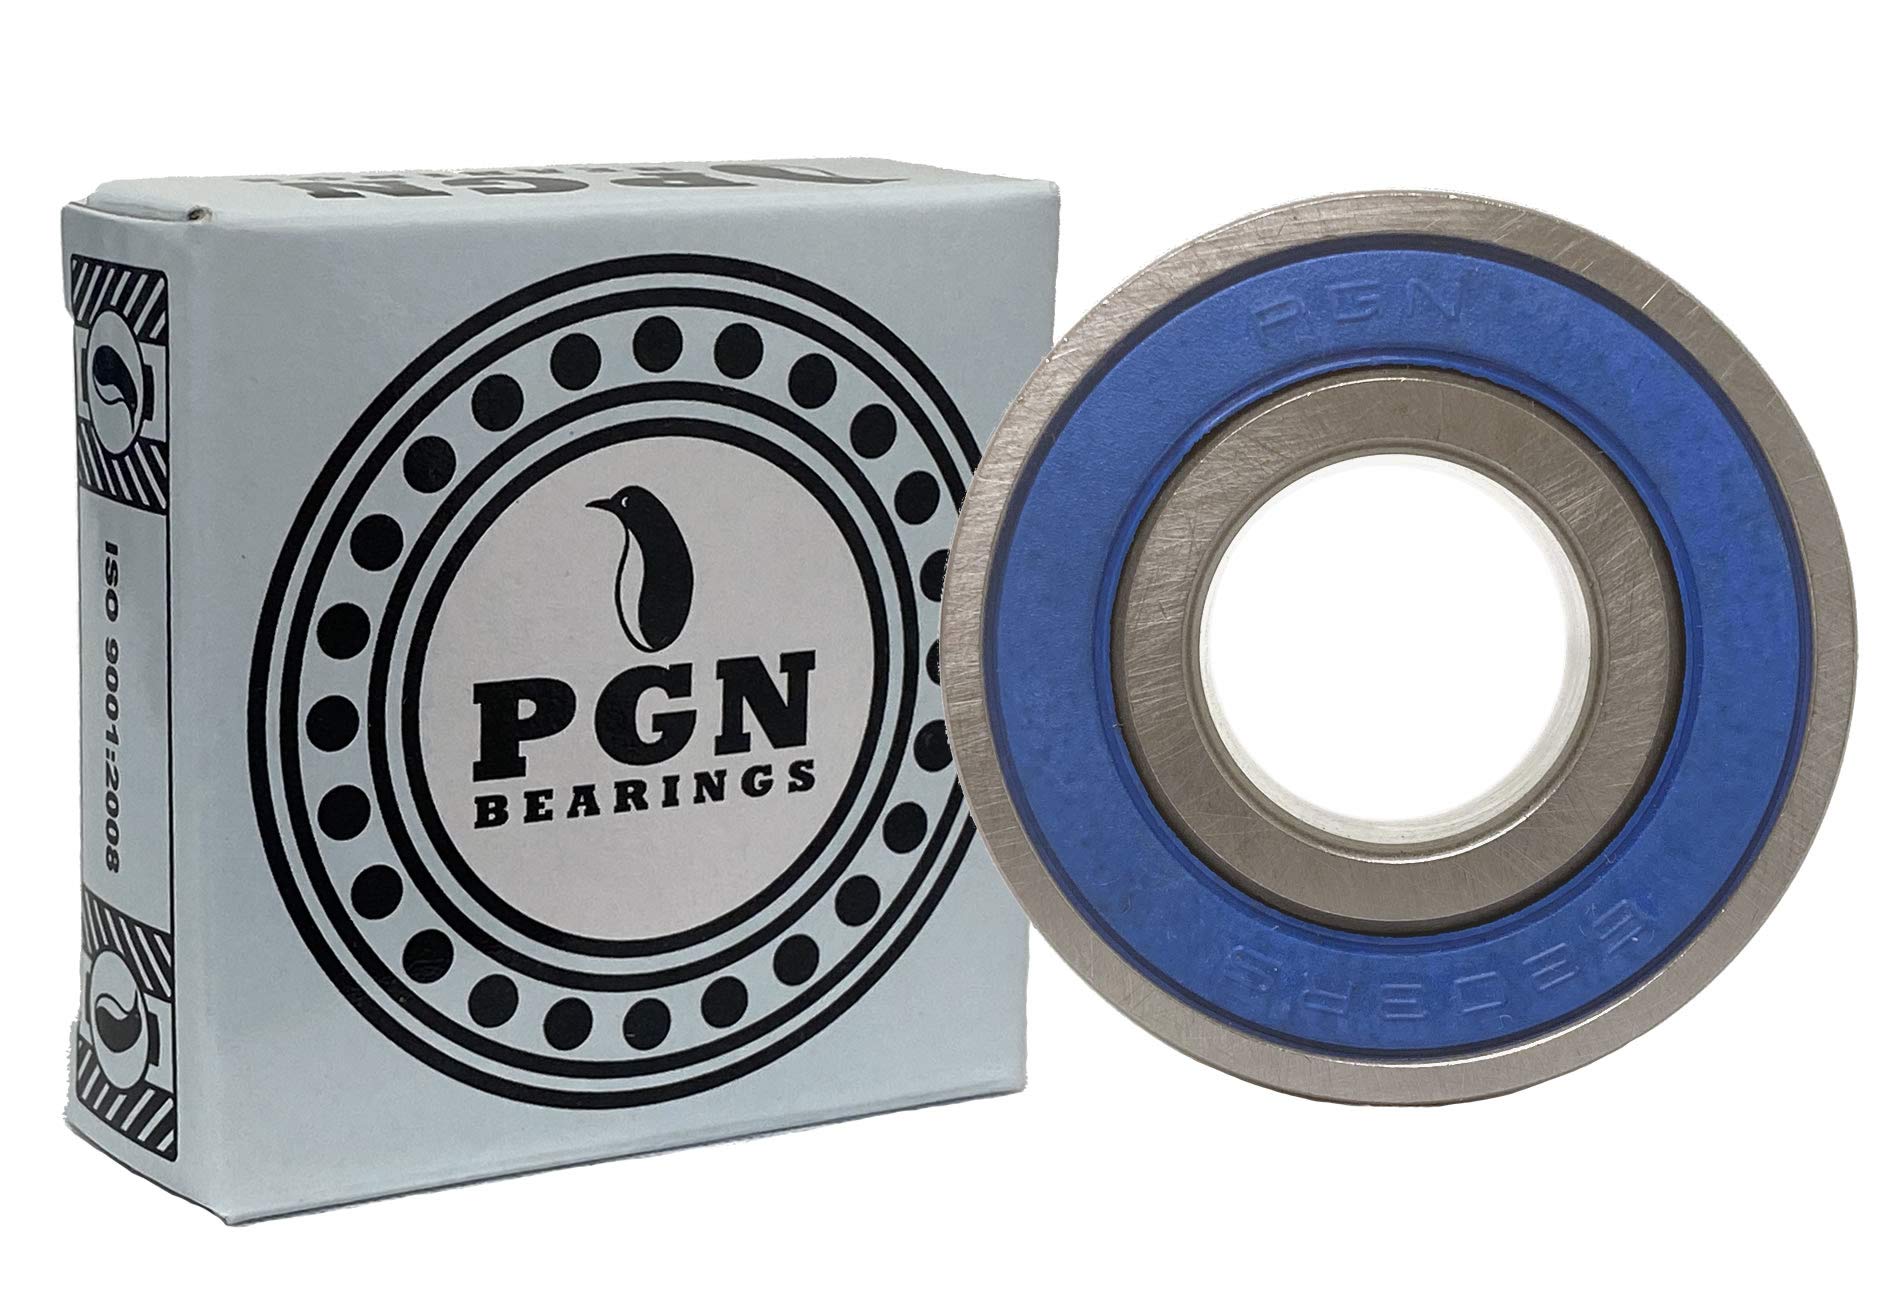 PGN Bearings (10 Pack) Pgn 6203-2Rs Sealed Ball Bearing - C3-17X40X12 - Lubricated - Chrome Steel